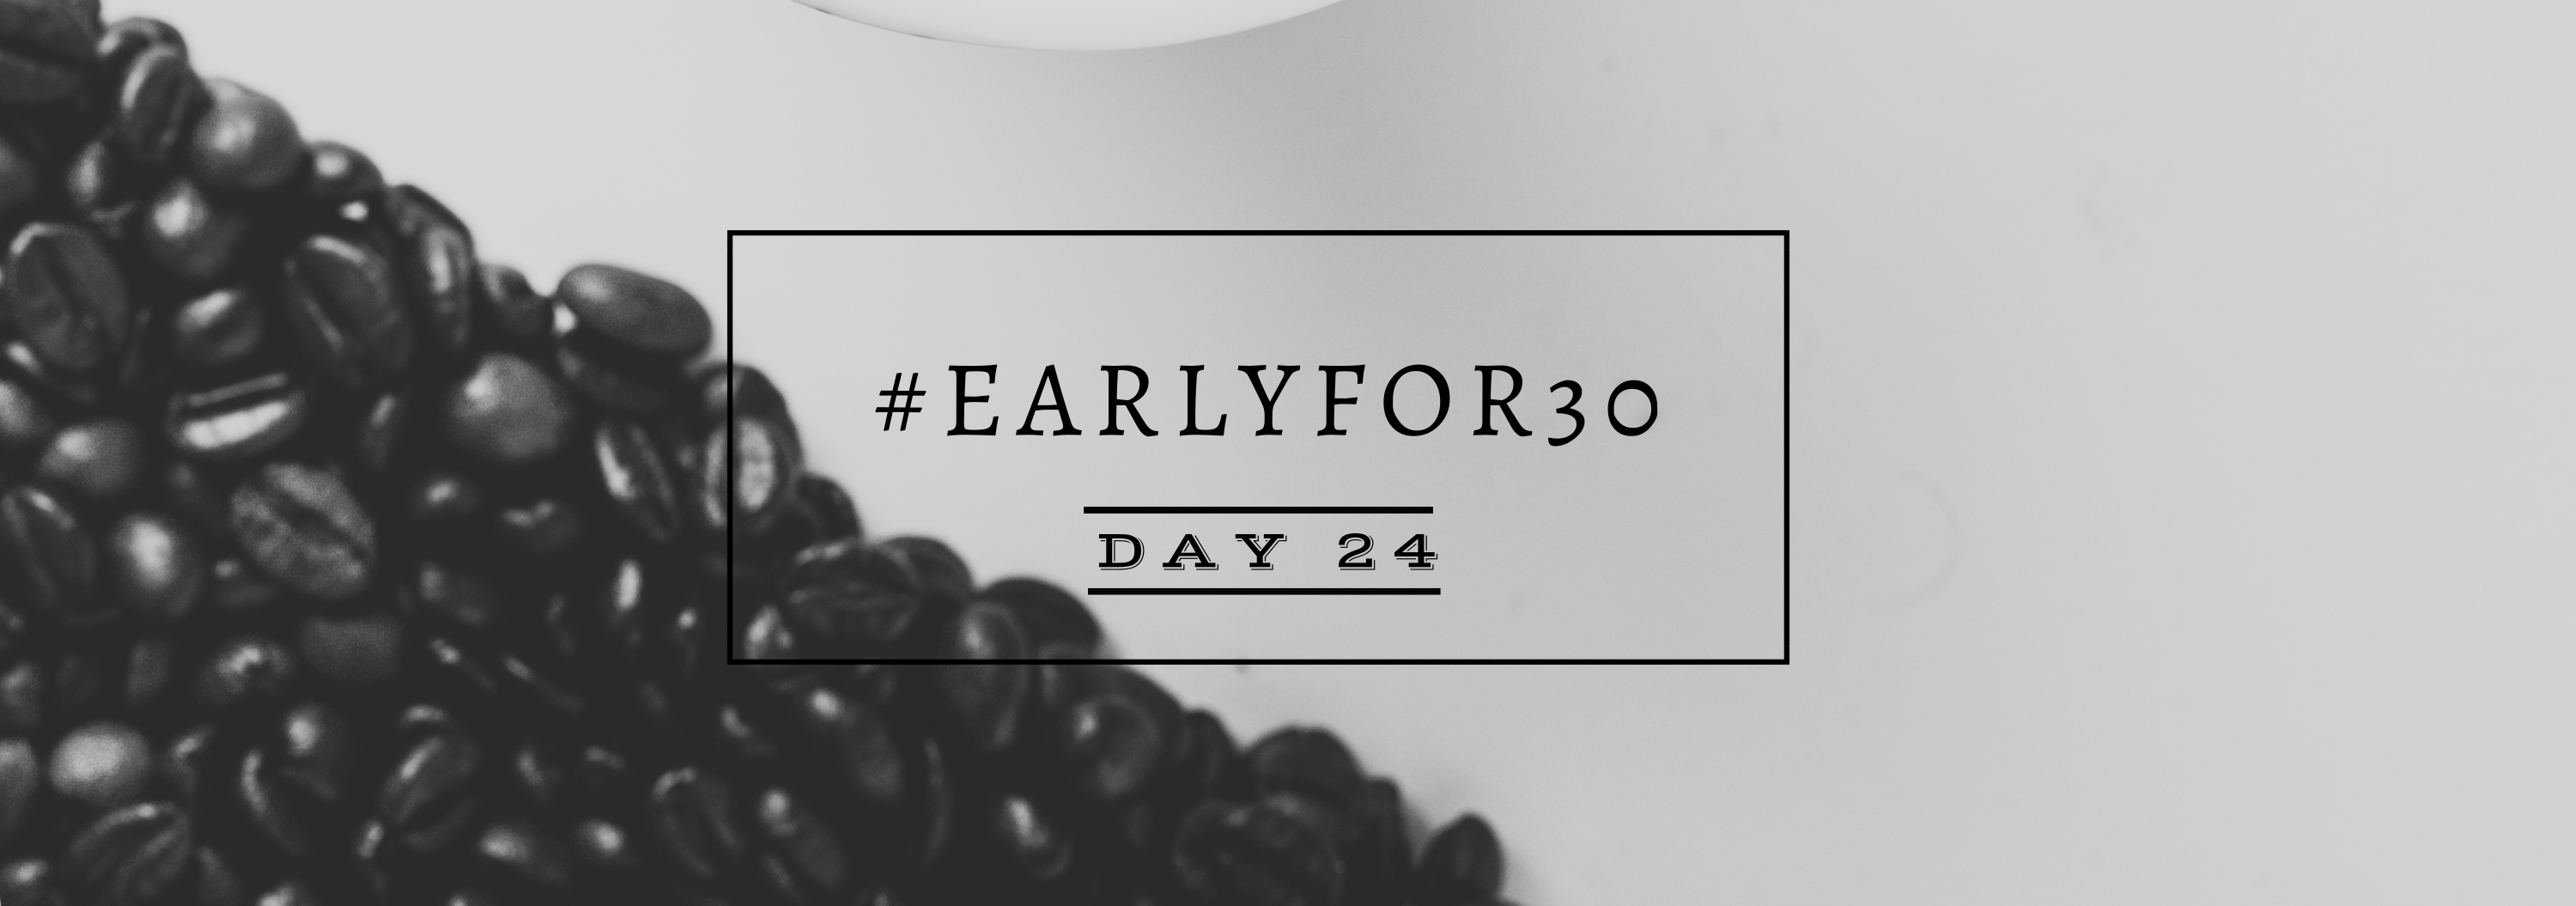 Day 24 Early for 30 Days Challenge